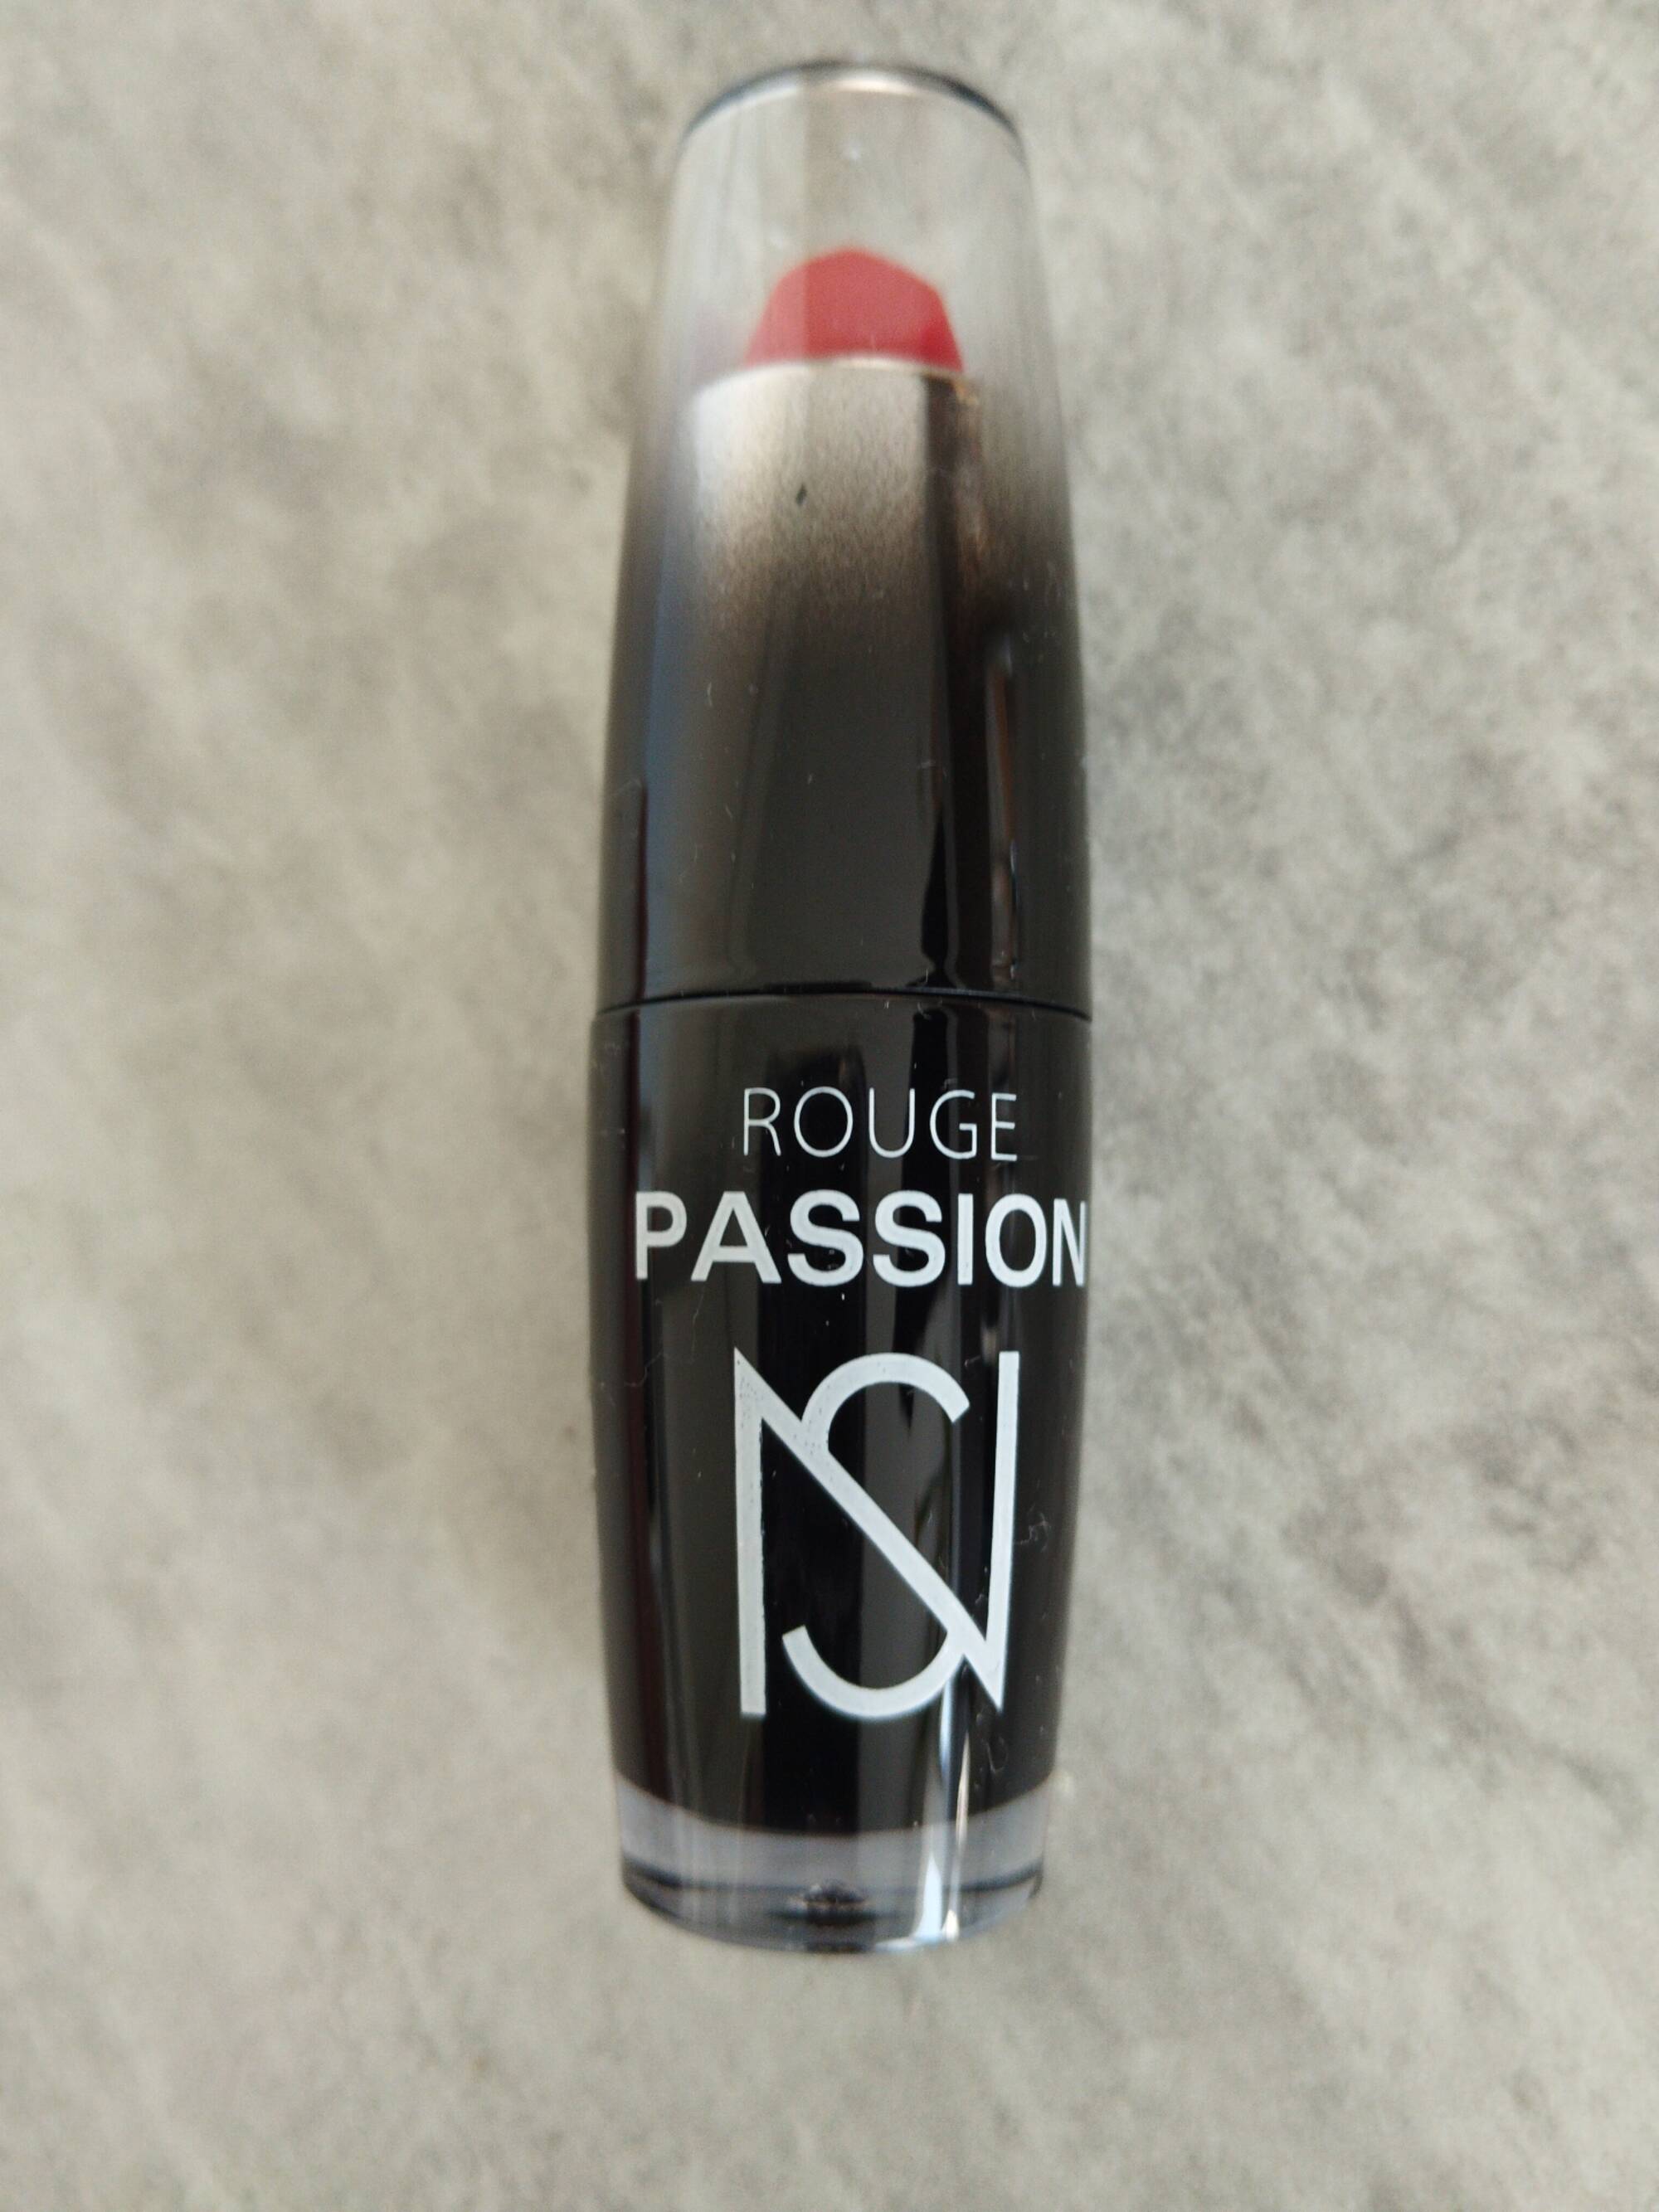 NS - Rouge passion